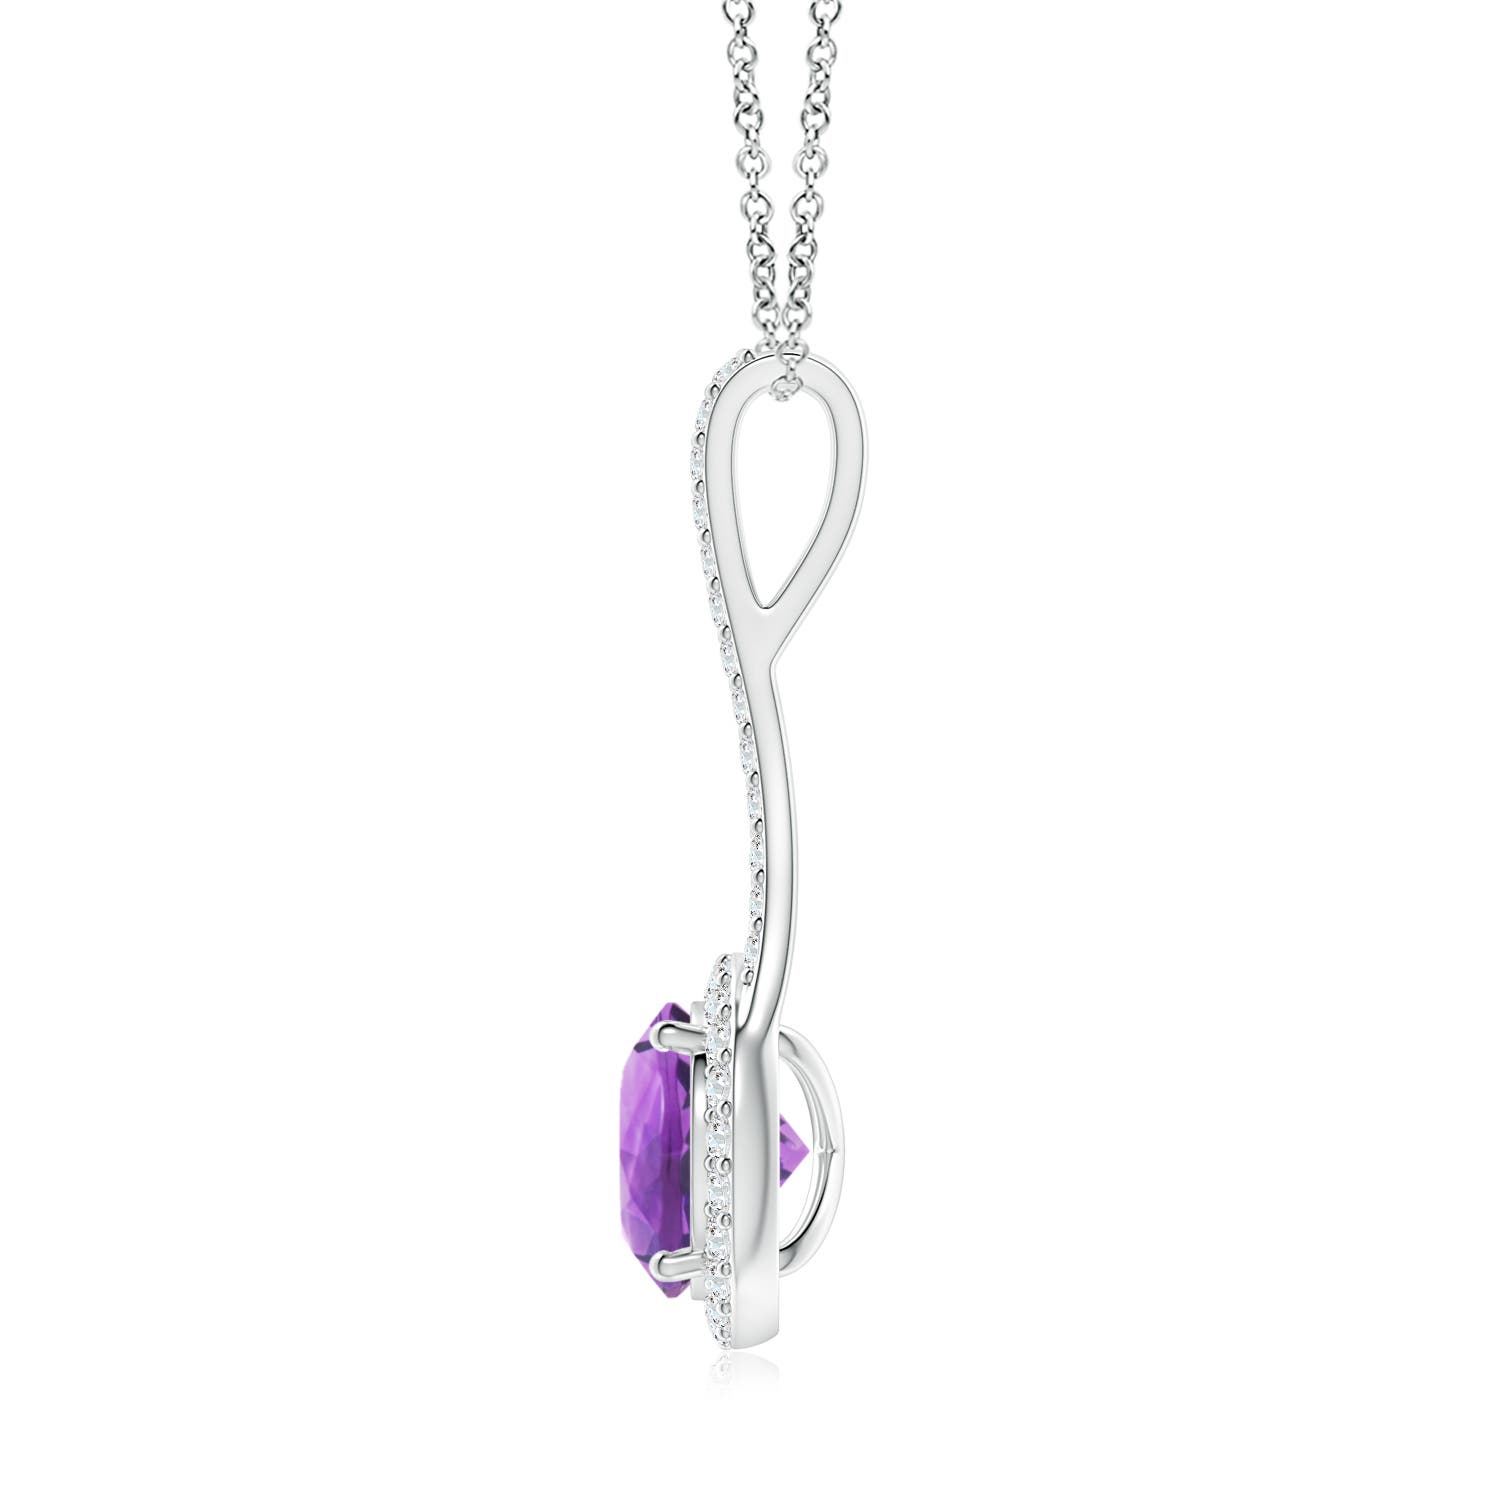 AA - Amethyst / 2.08 CT / 14 KT White Gold